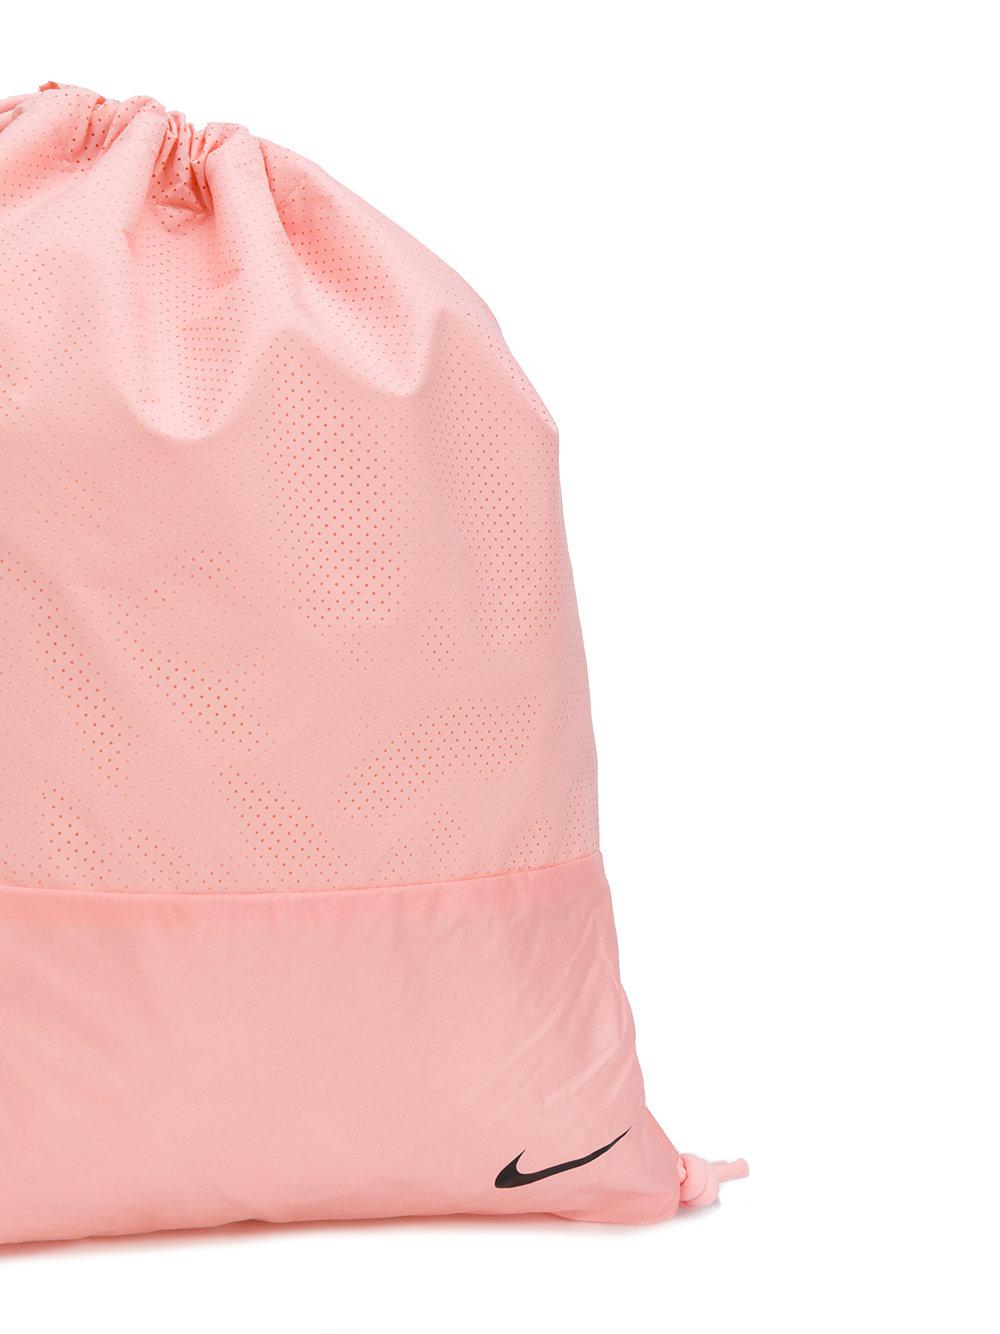 Nike Synthetic Logo Drawstring Backpack in Pink & Purple (Pink) - Lyst